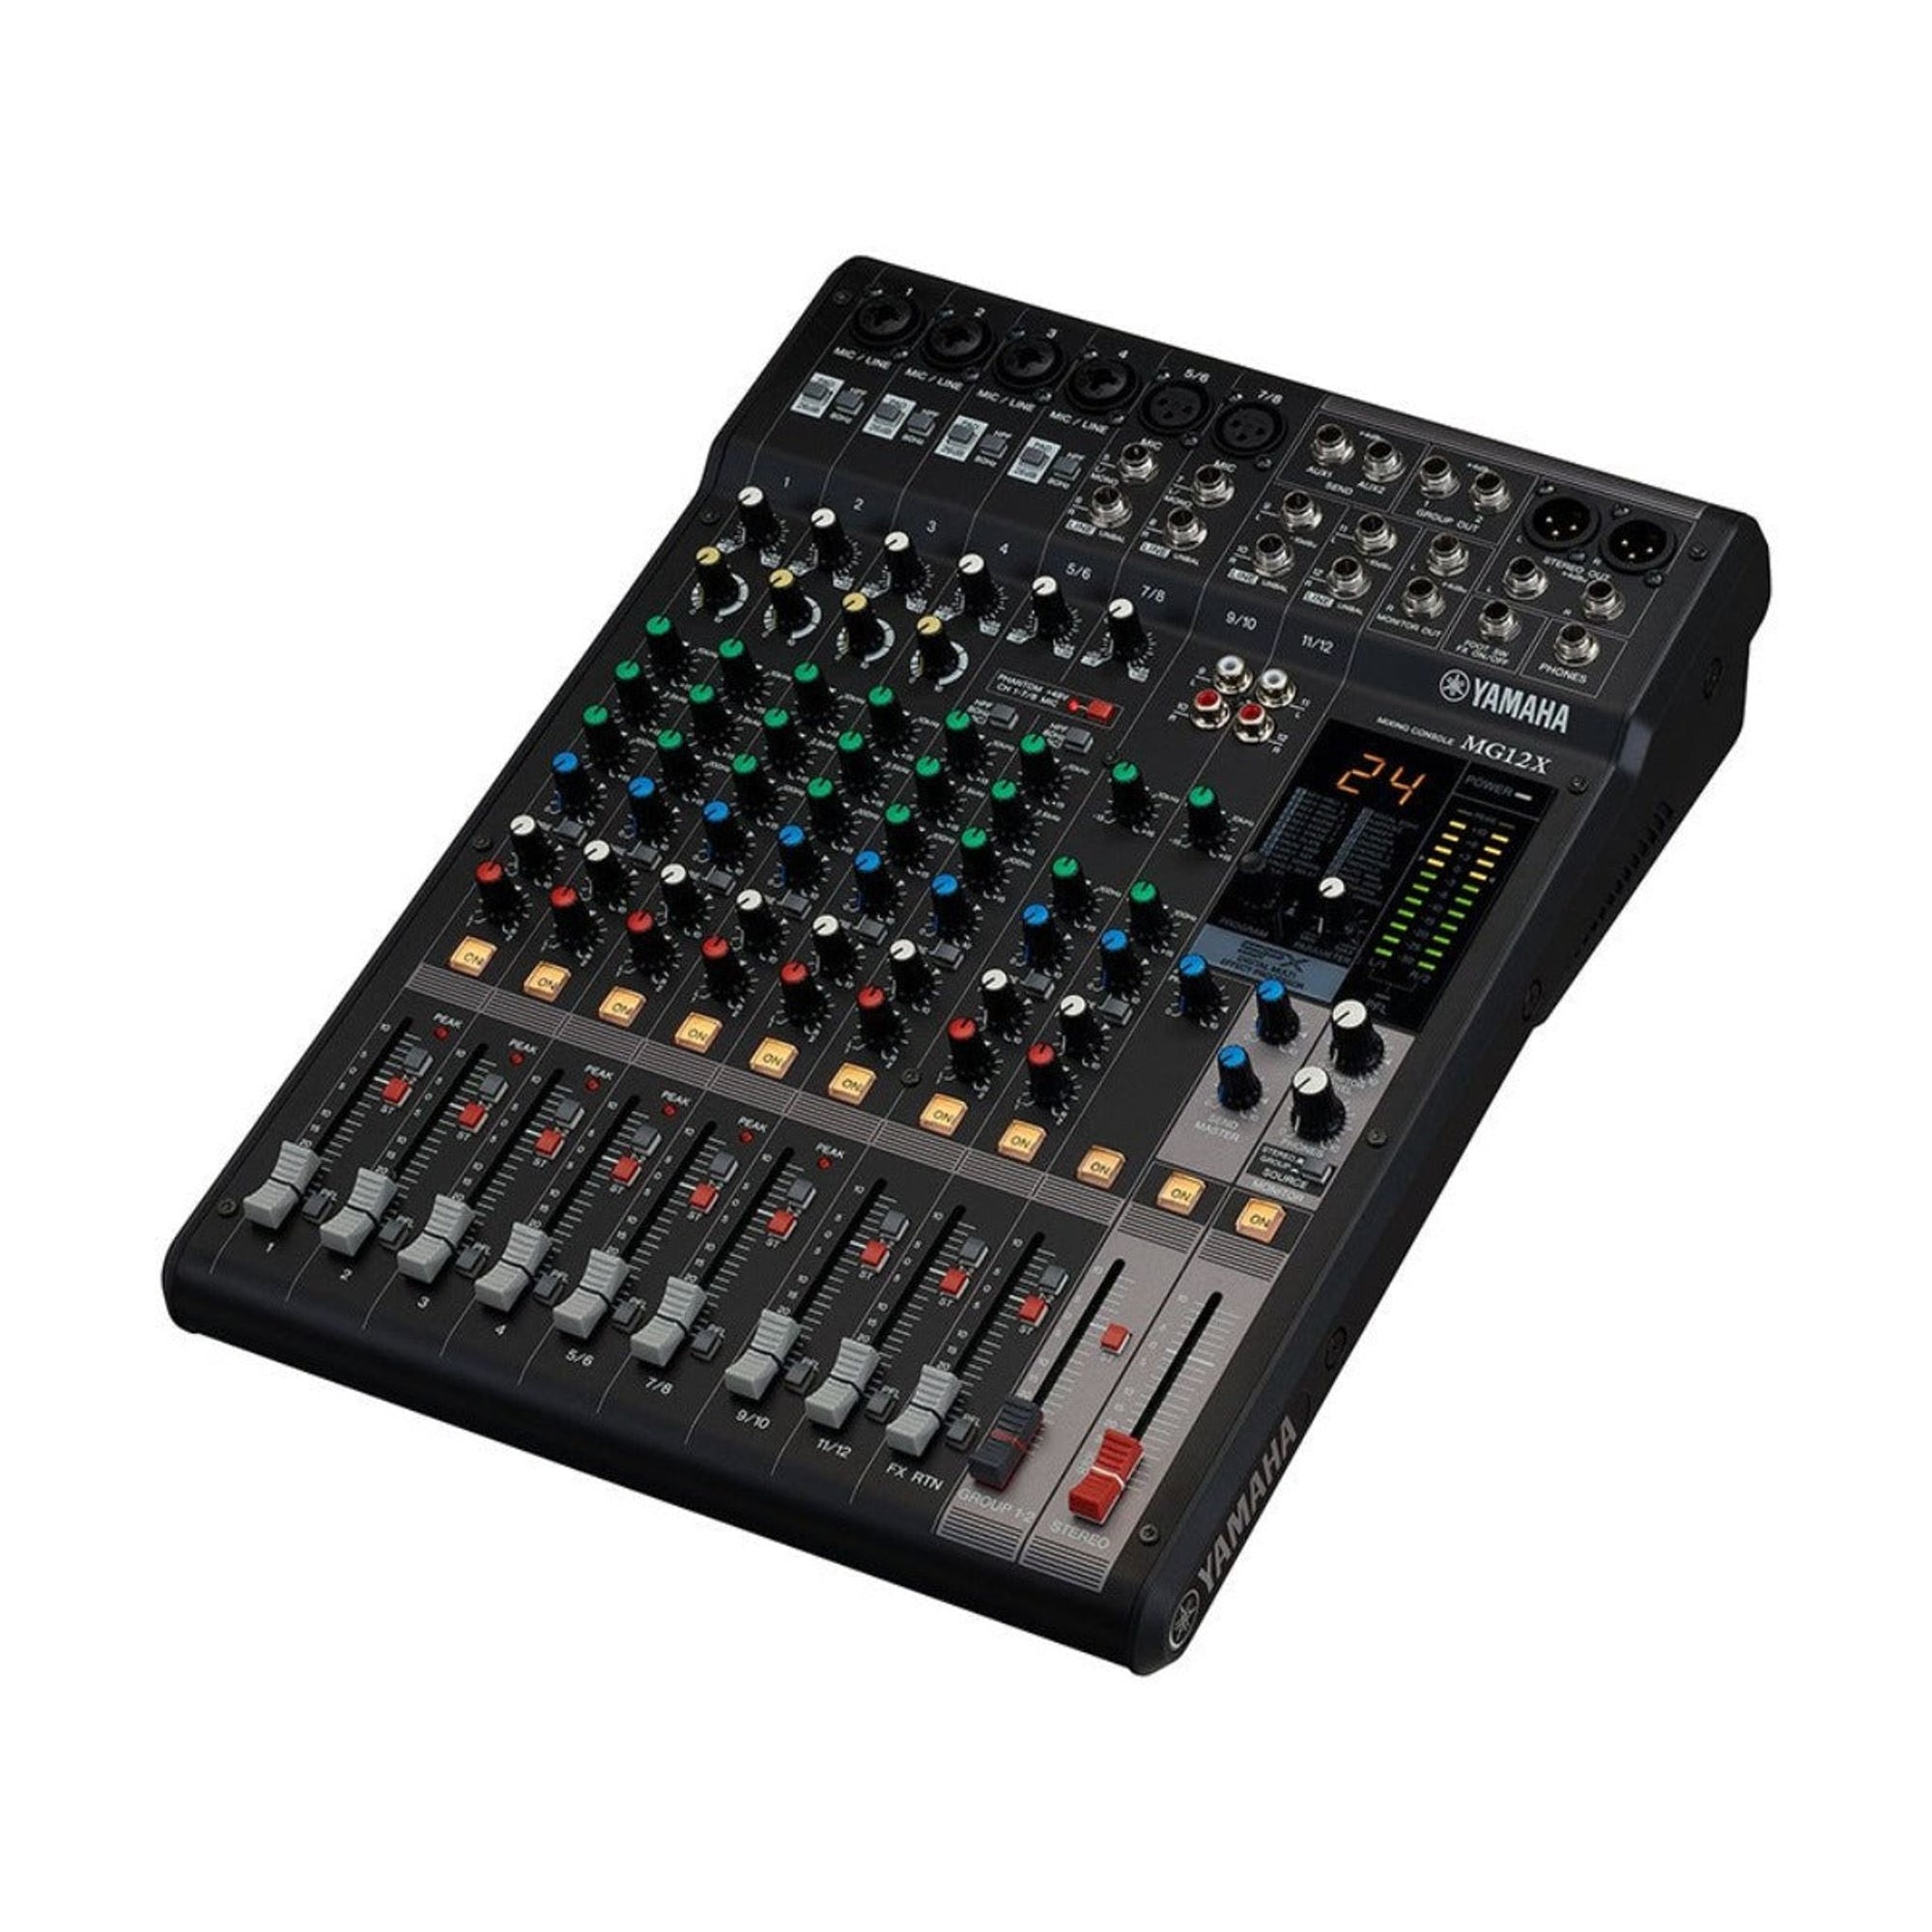 With an intuitive, easy-to-use interface, the Yamaga MG Series boasts an extensive lineup of compact mixing consoles with models ranging from six to twenty channels, suitable for a diverse range of users and applications.